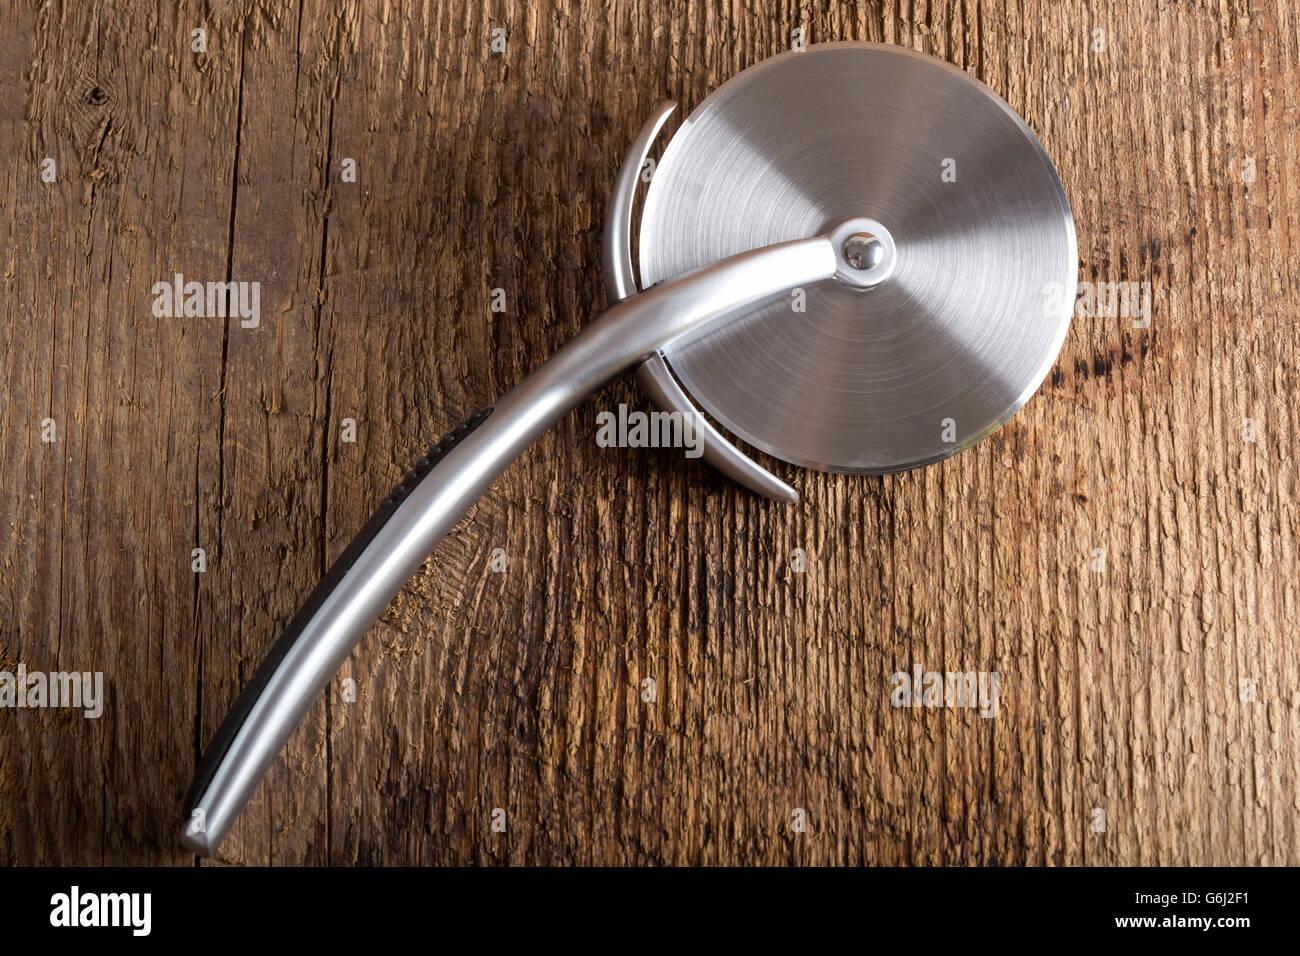 Circular Pizza Cutter on wooden rustic background Stock Photo